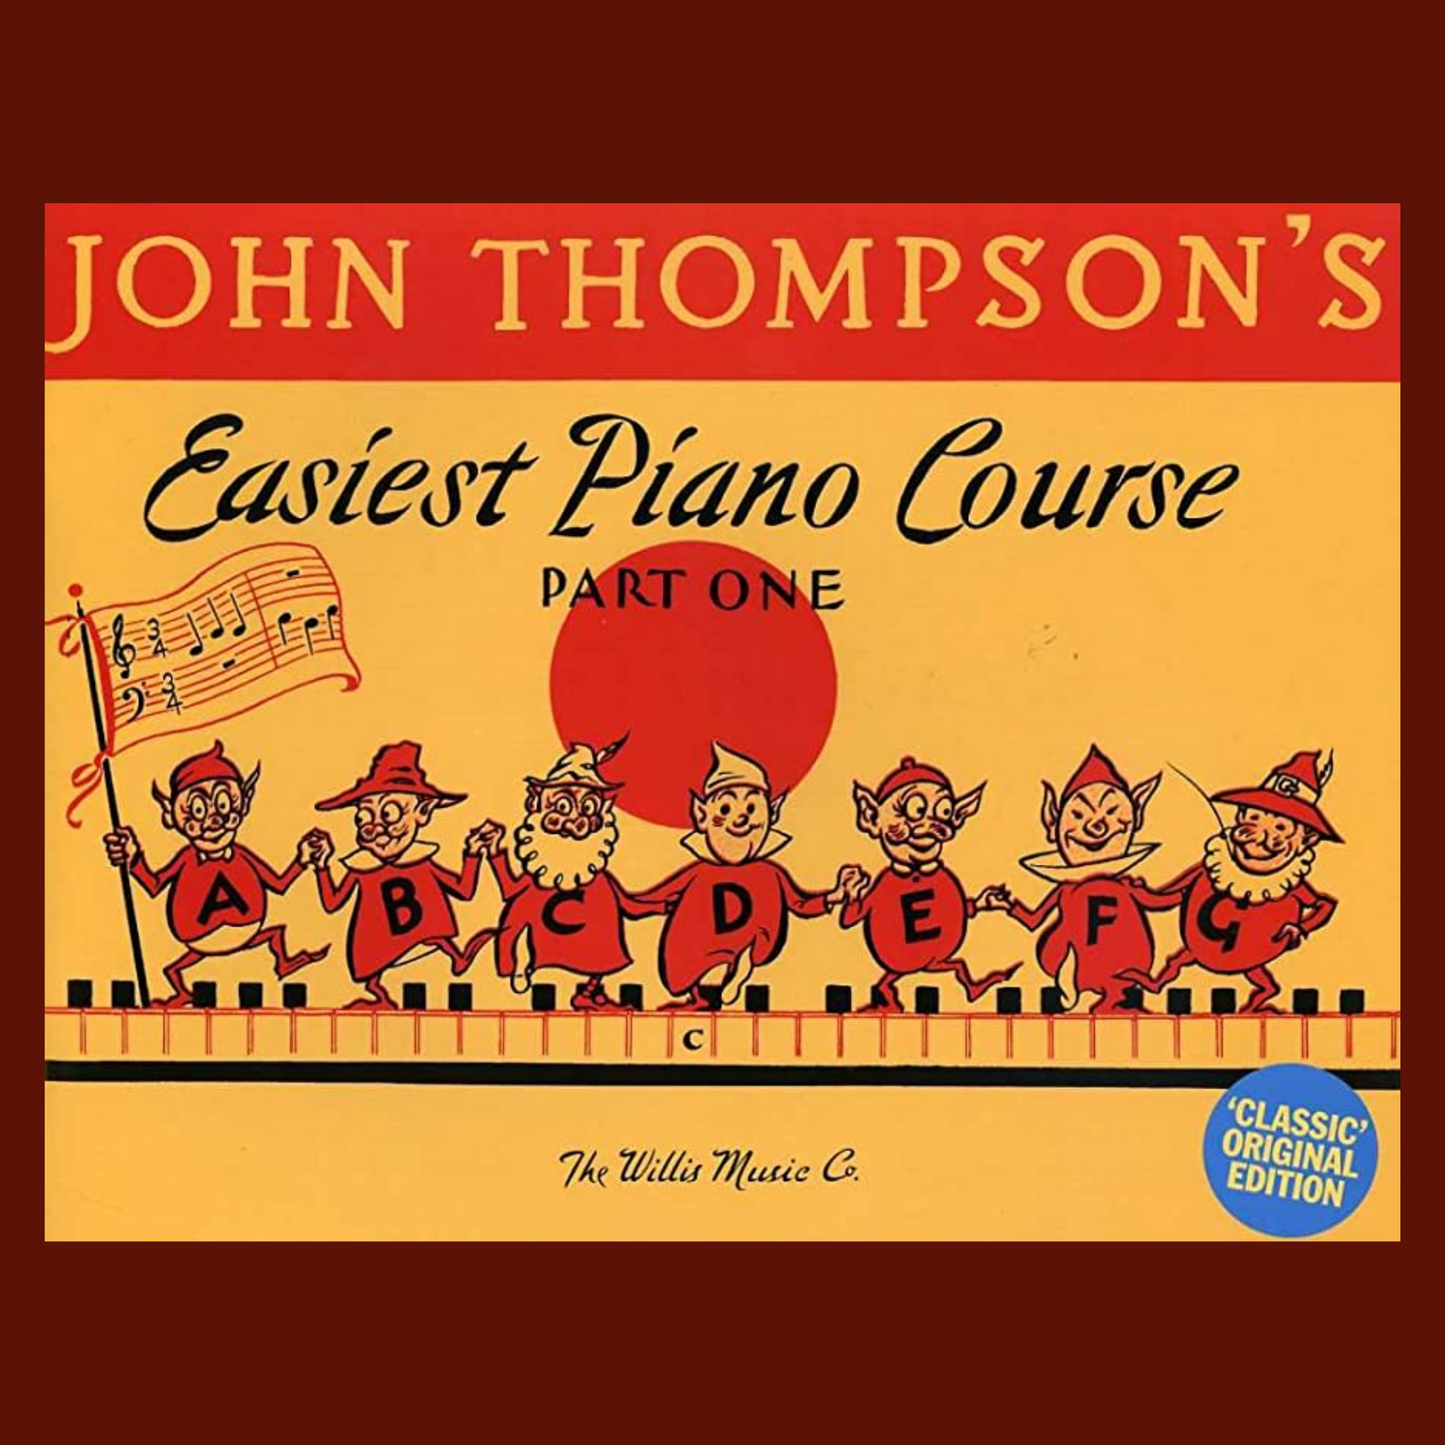 John Thompson's Easiest Piano Course - Part 1 Classic Edition Book